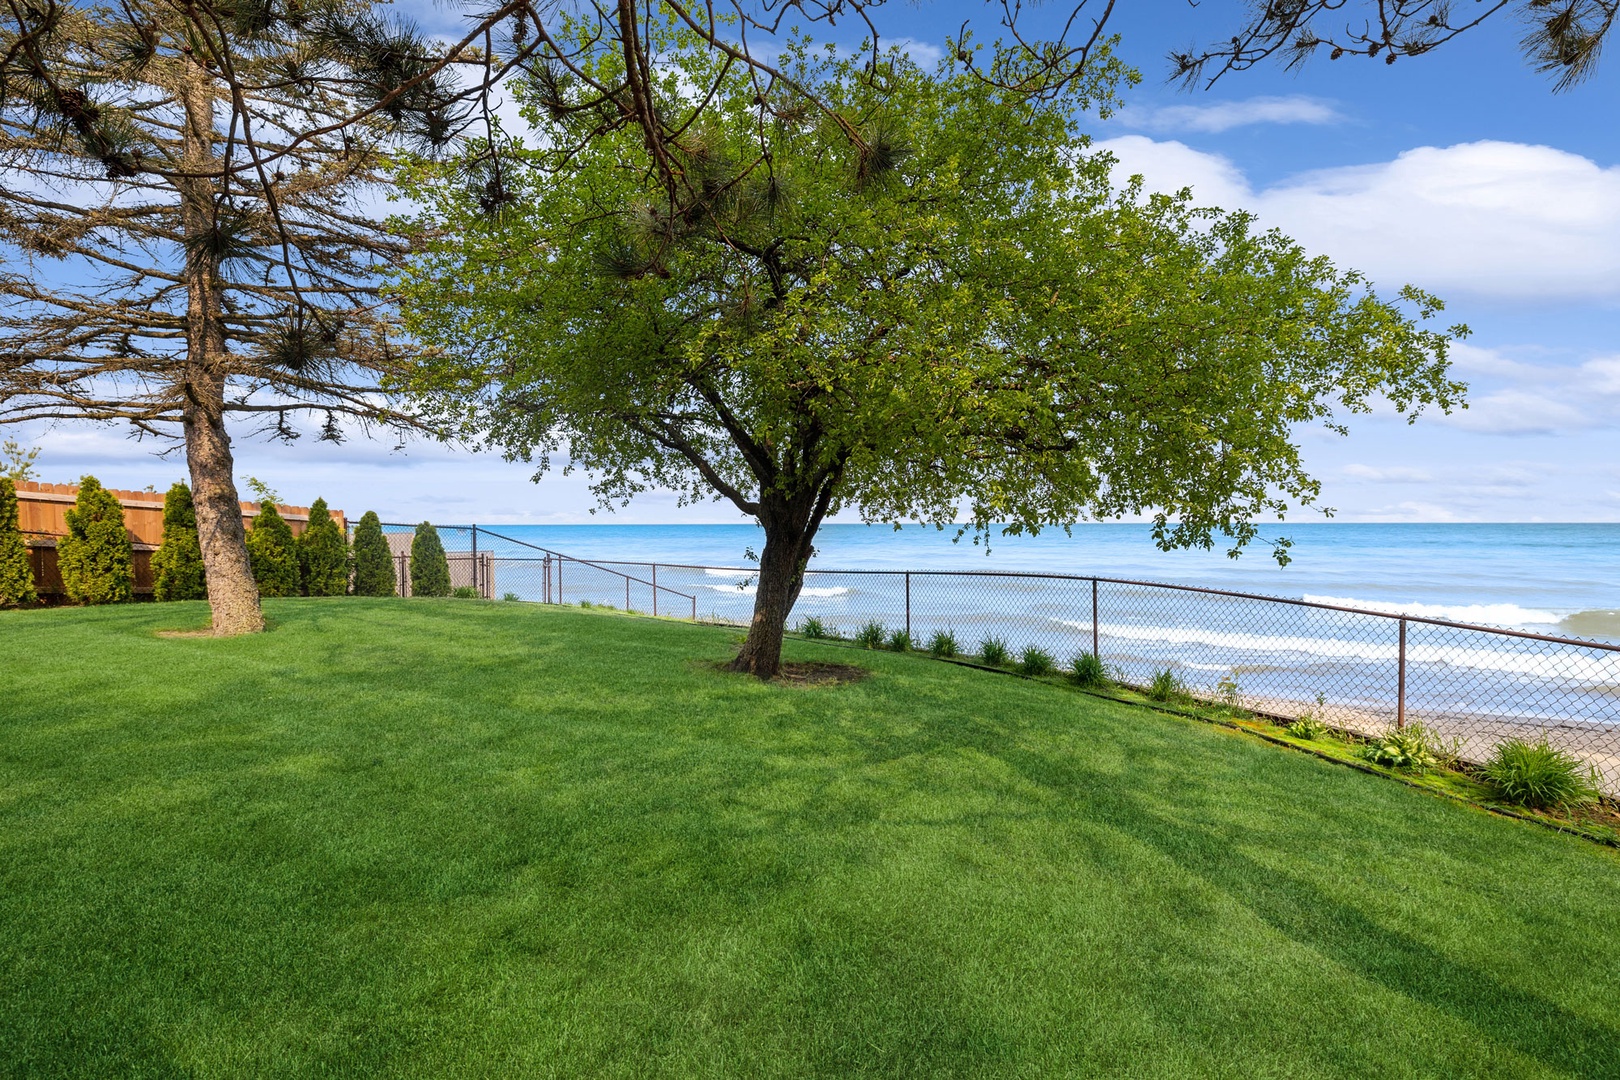 The private backyard offers unobstructed views of the lake.